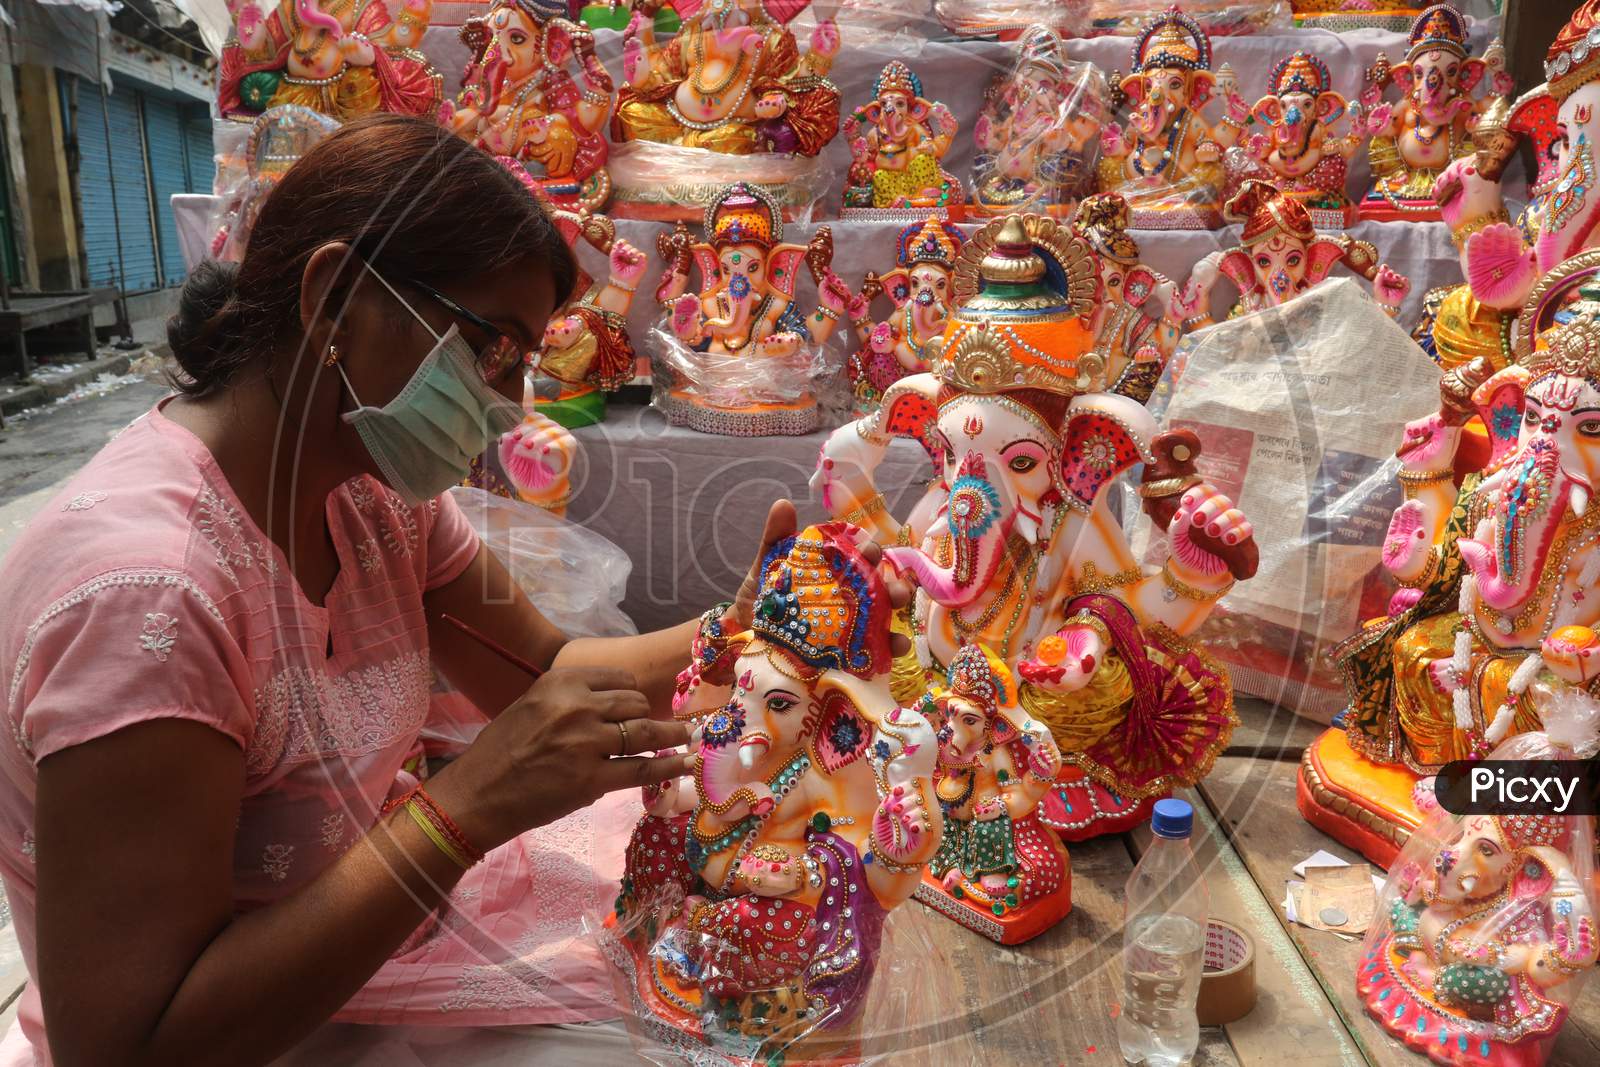 Ari woman artisan gives a finishing touch to an idol of Ganesh ahead of the Ganesh Chaturthi festival  (puja ) at her worship in Kumartuli North kolkata on Sunday 16 august 2020